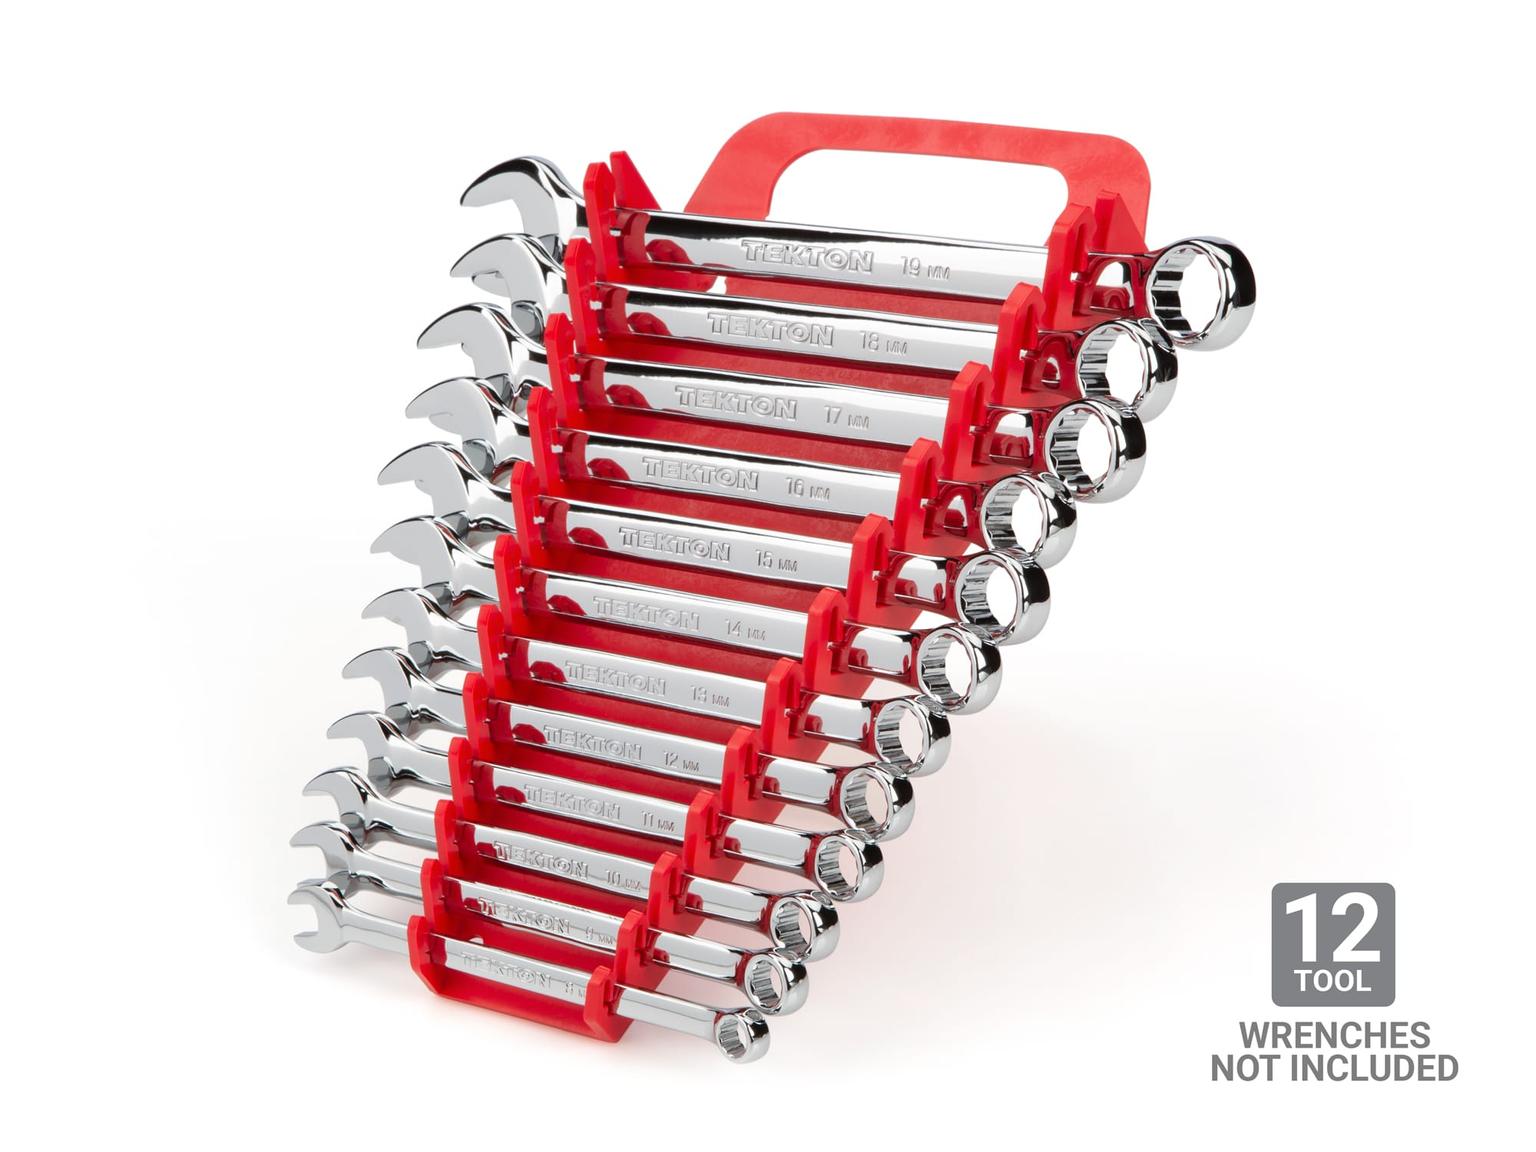 12-Tool Combination Wrench Holder (Red) | TEKTON | Made in USA